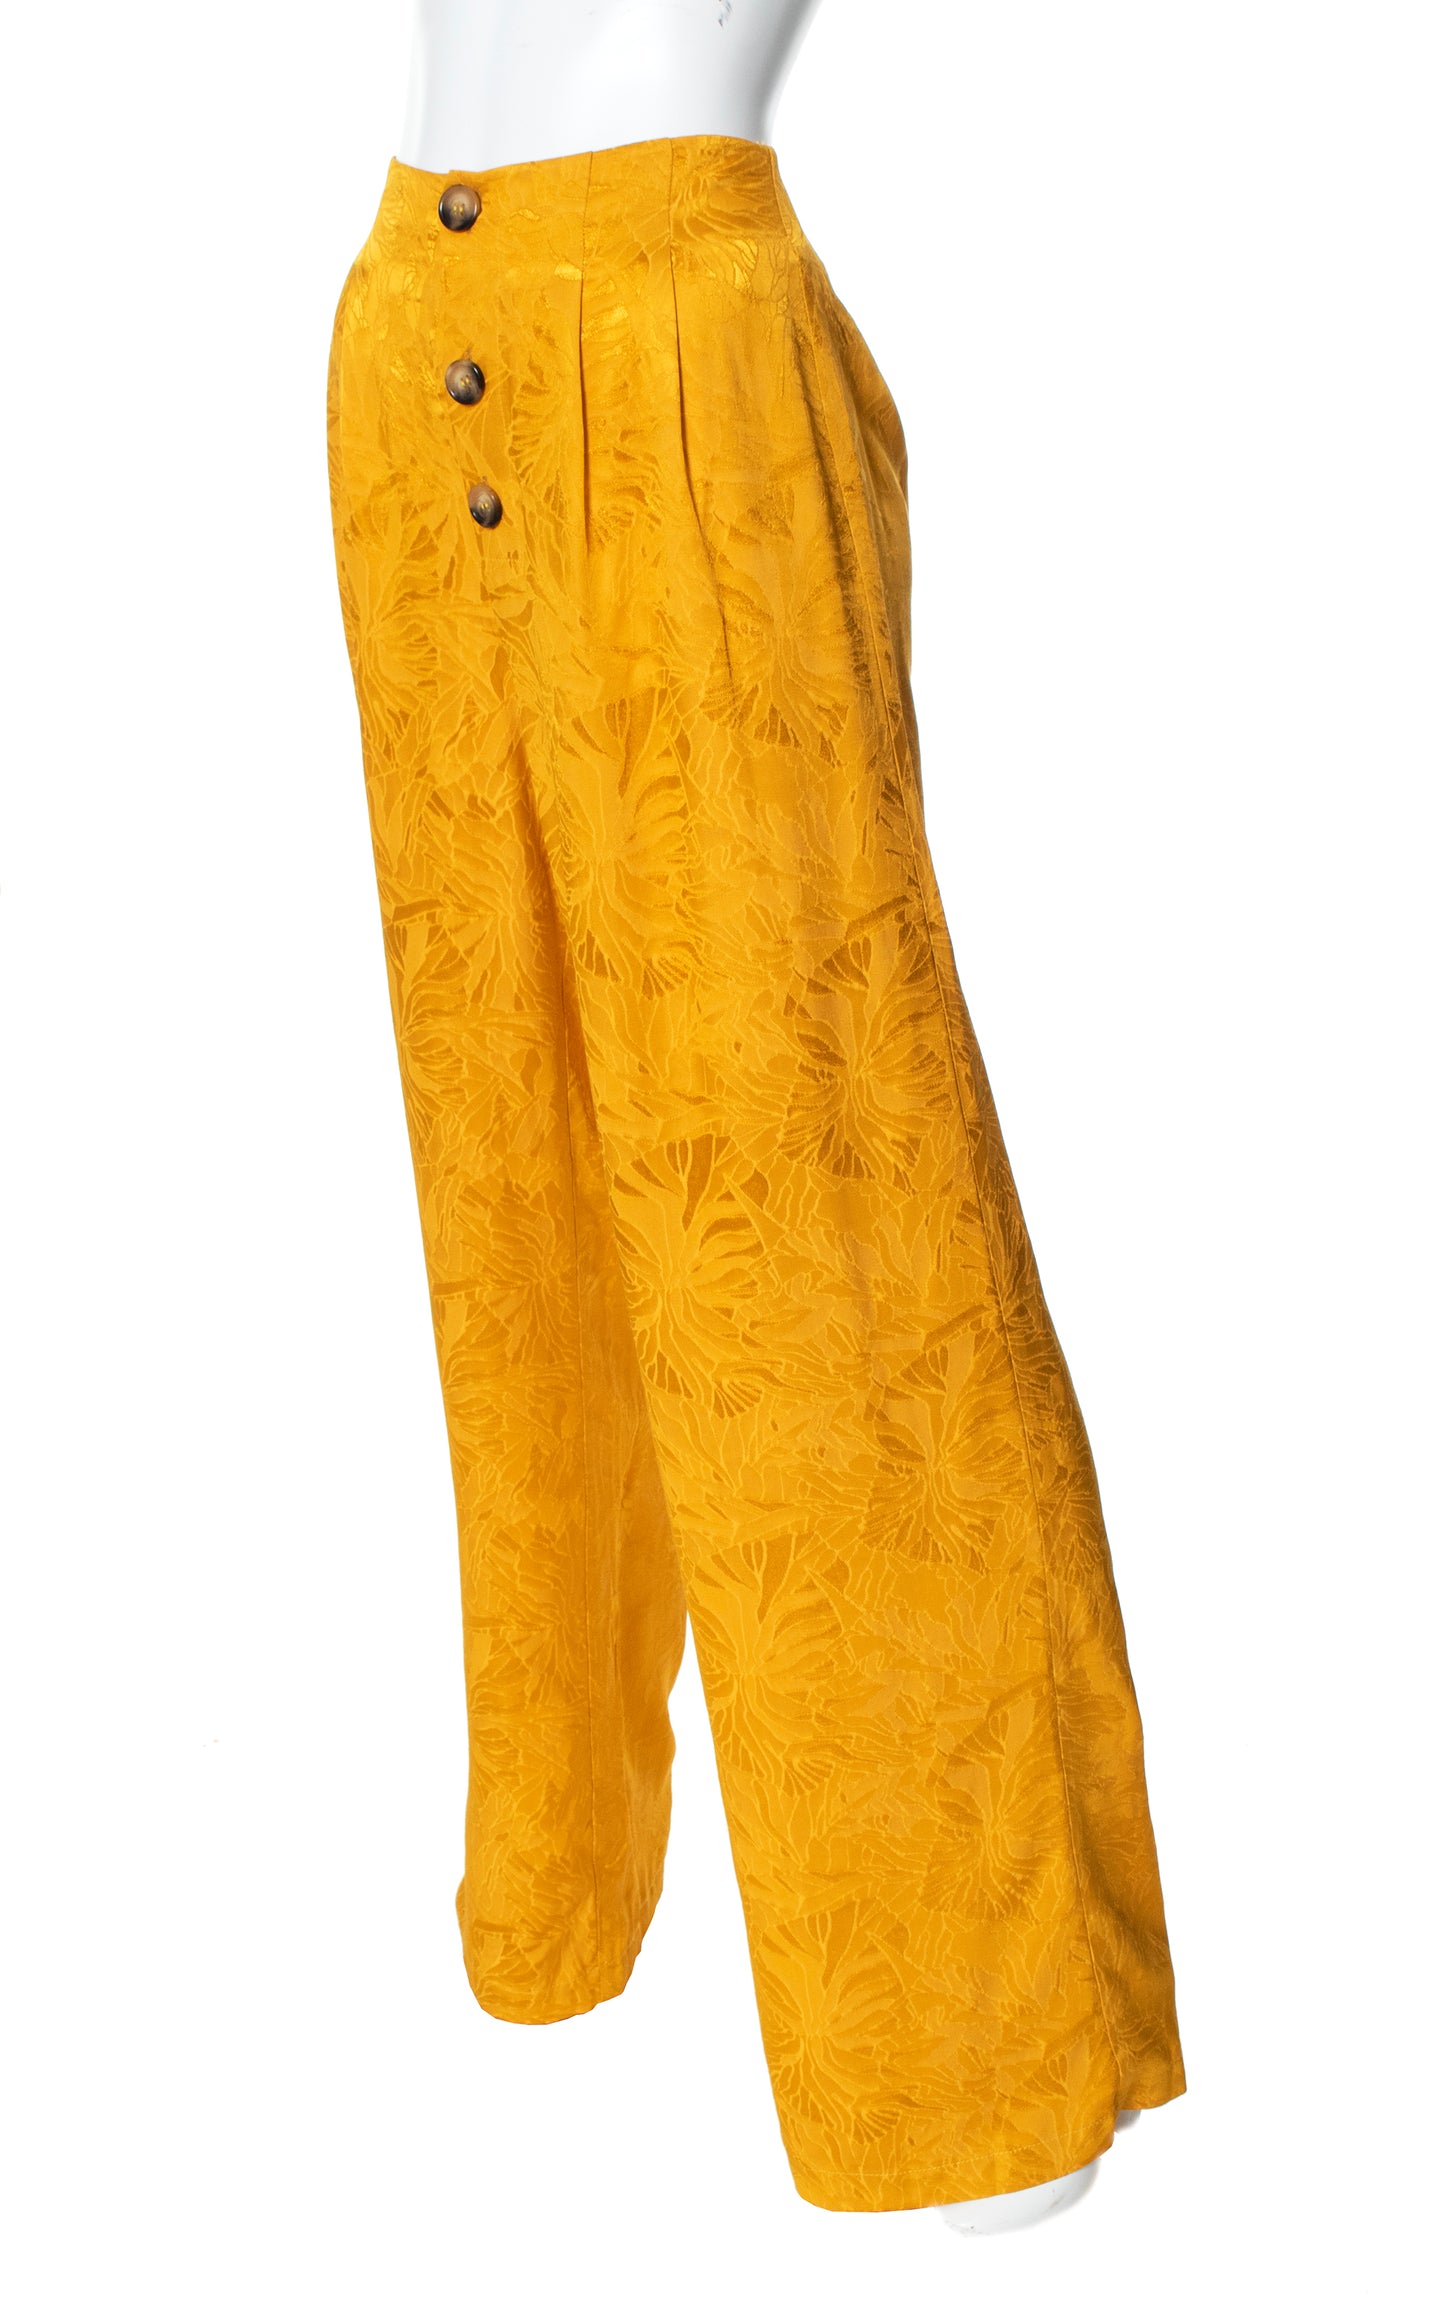 HOUSE OF HARLOW 1960 1940s Style Leaf Jacquard Golden Mustard Yellow High Waisted Wide Leg Trousers Pants BirthdayLifeVintage